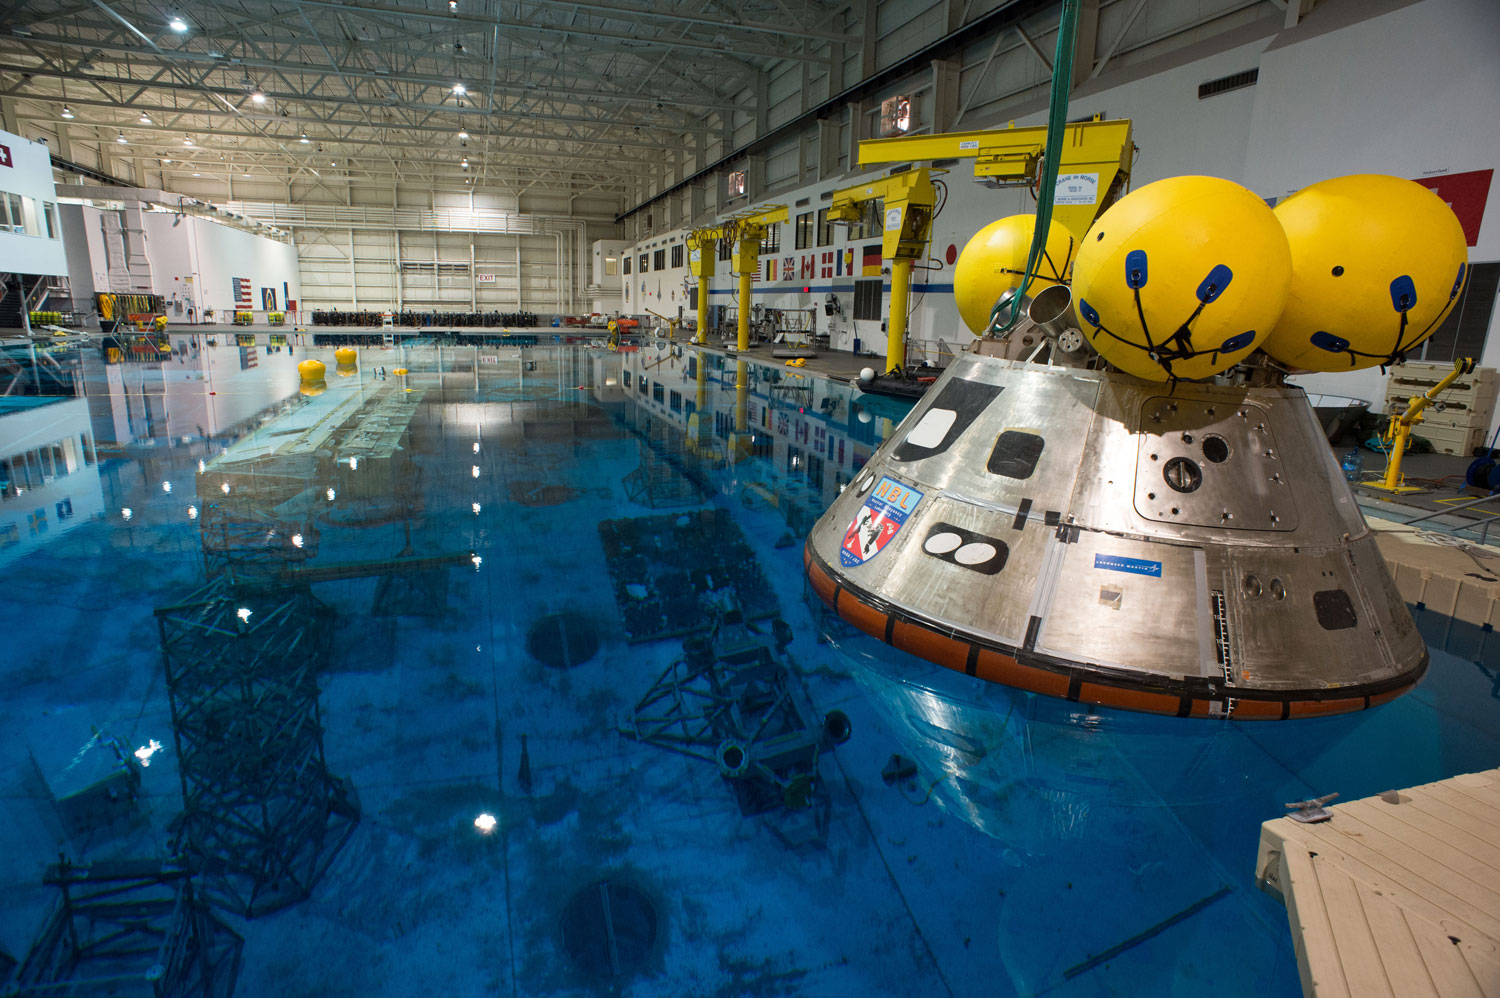 A model of Orion floats above an underwater mockup of the International Space Station in the Neutral Buoyancy Laboratory in Houston on April 25, 2013.